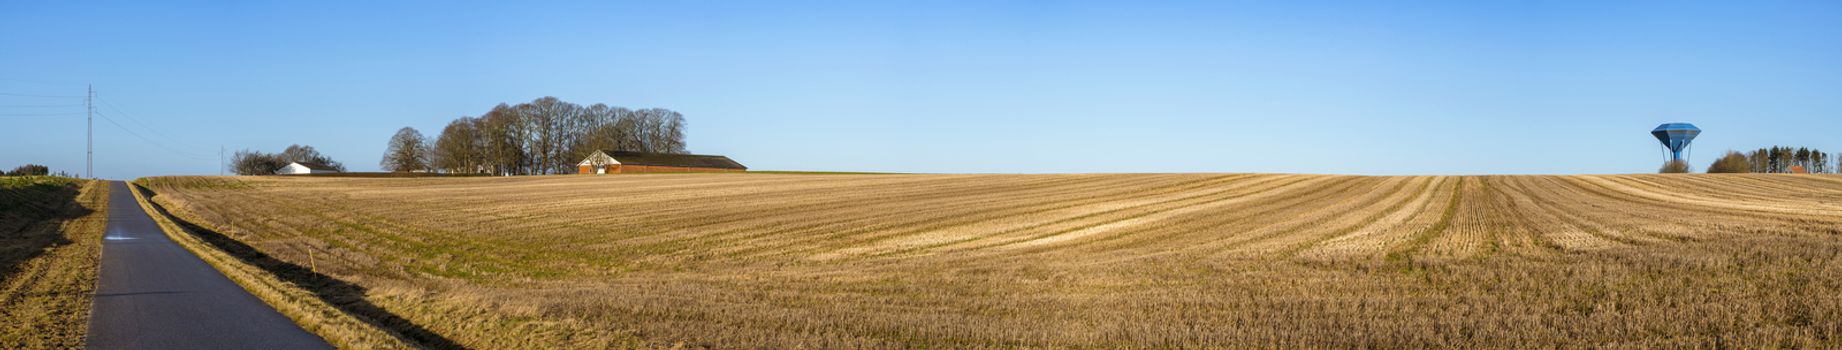 Rural panorama landscape with a dry field under a blue sky with a water tower on the right side